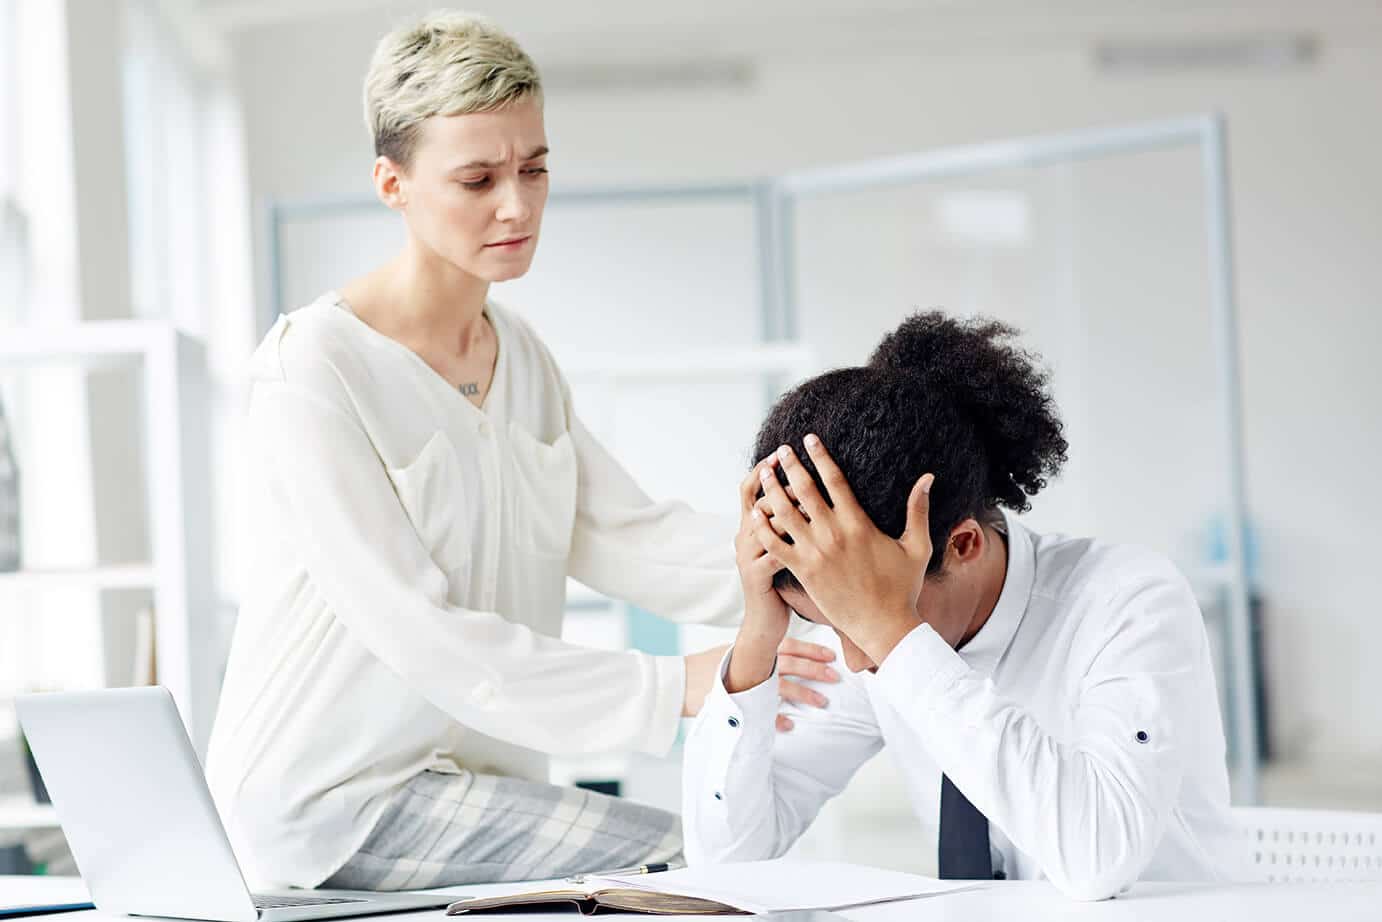 When Can You Claim Damages for Emotional Distress in a Lawsuit?